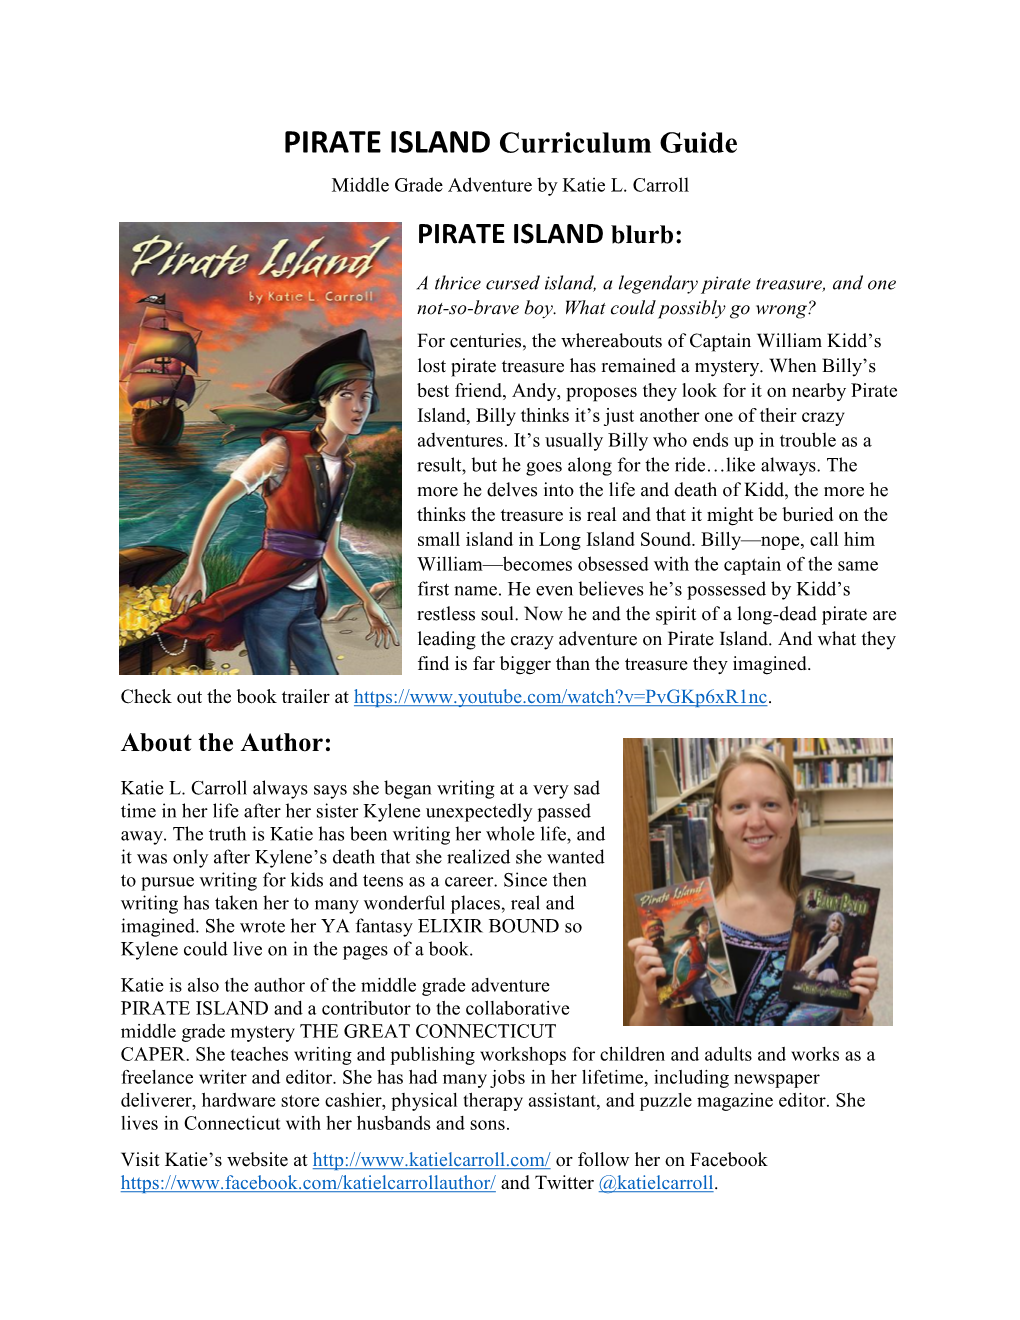 PIRATE ISLAND Curriculum Guide Middle Grade Adventure by Katie L